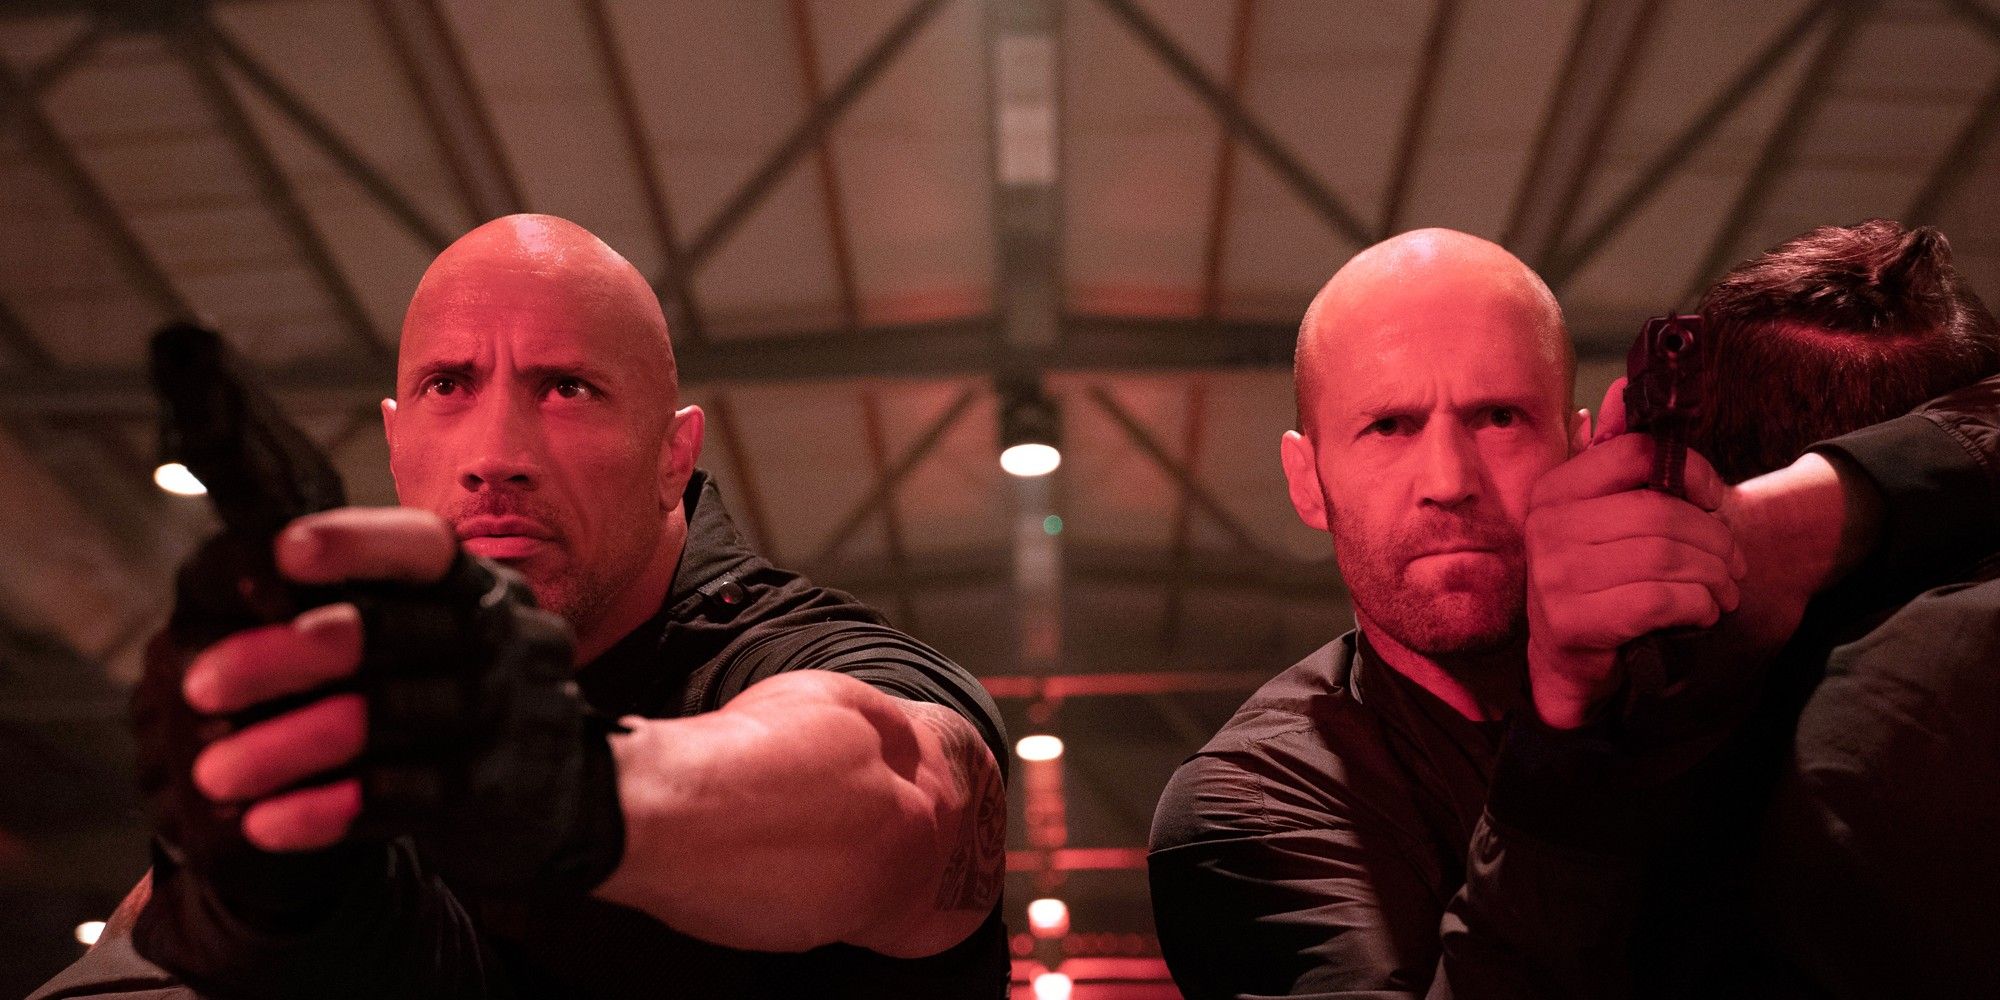 Jason Statham as Shaw and Dwayne The Rock Johnson as Hobbs pointing guns in a warehouse in Hobbs & Shaw